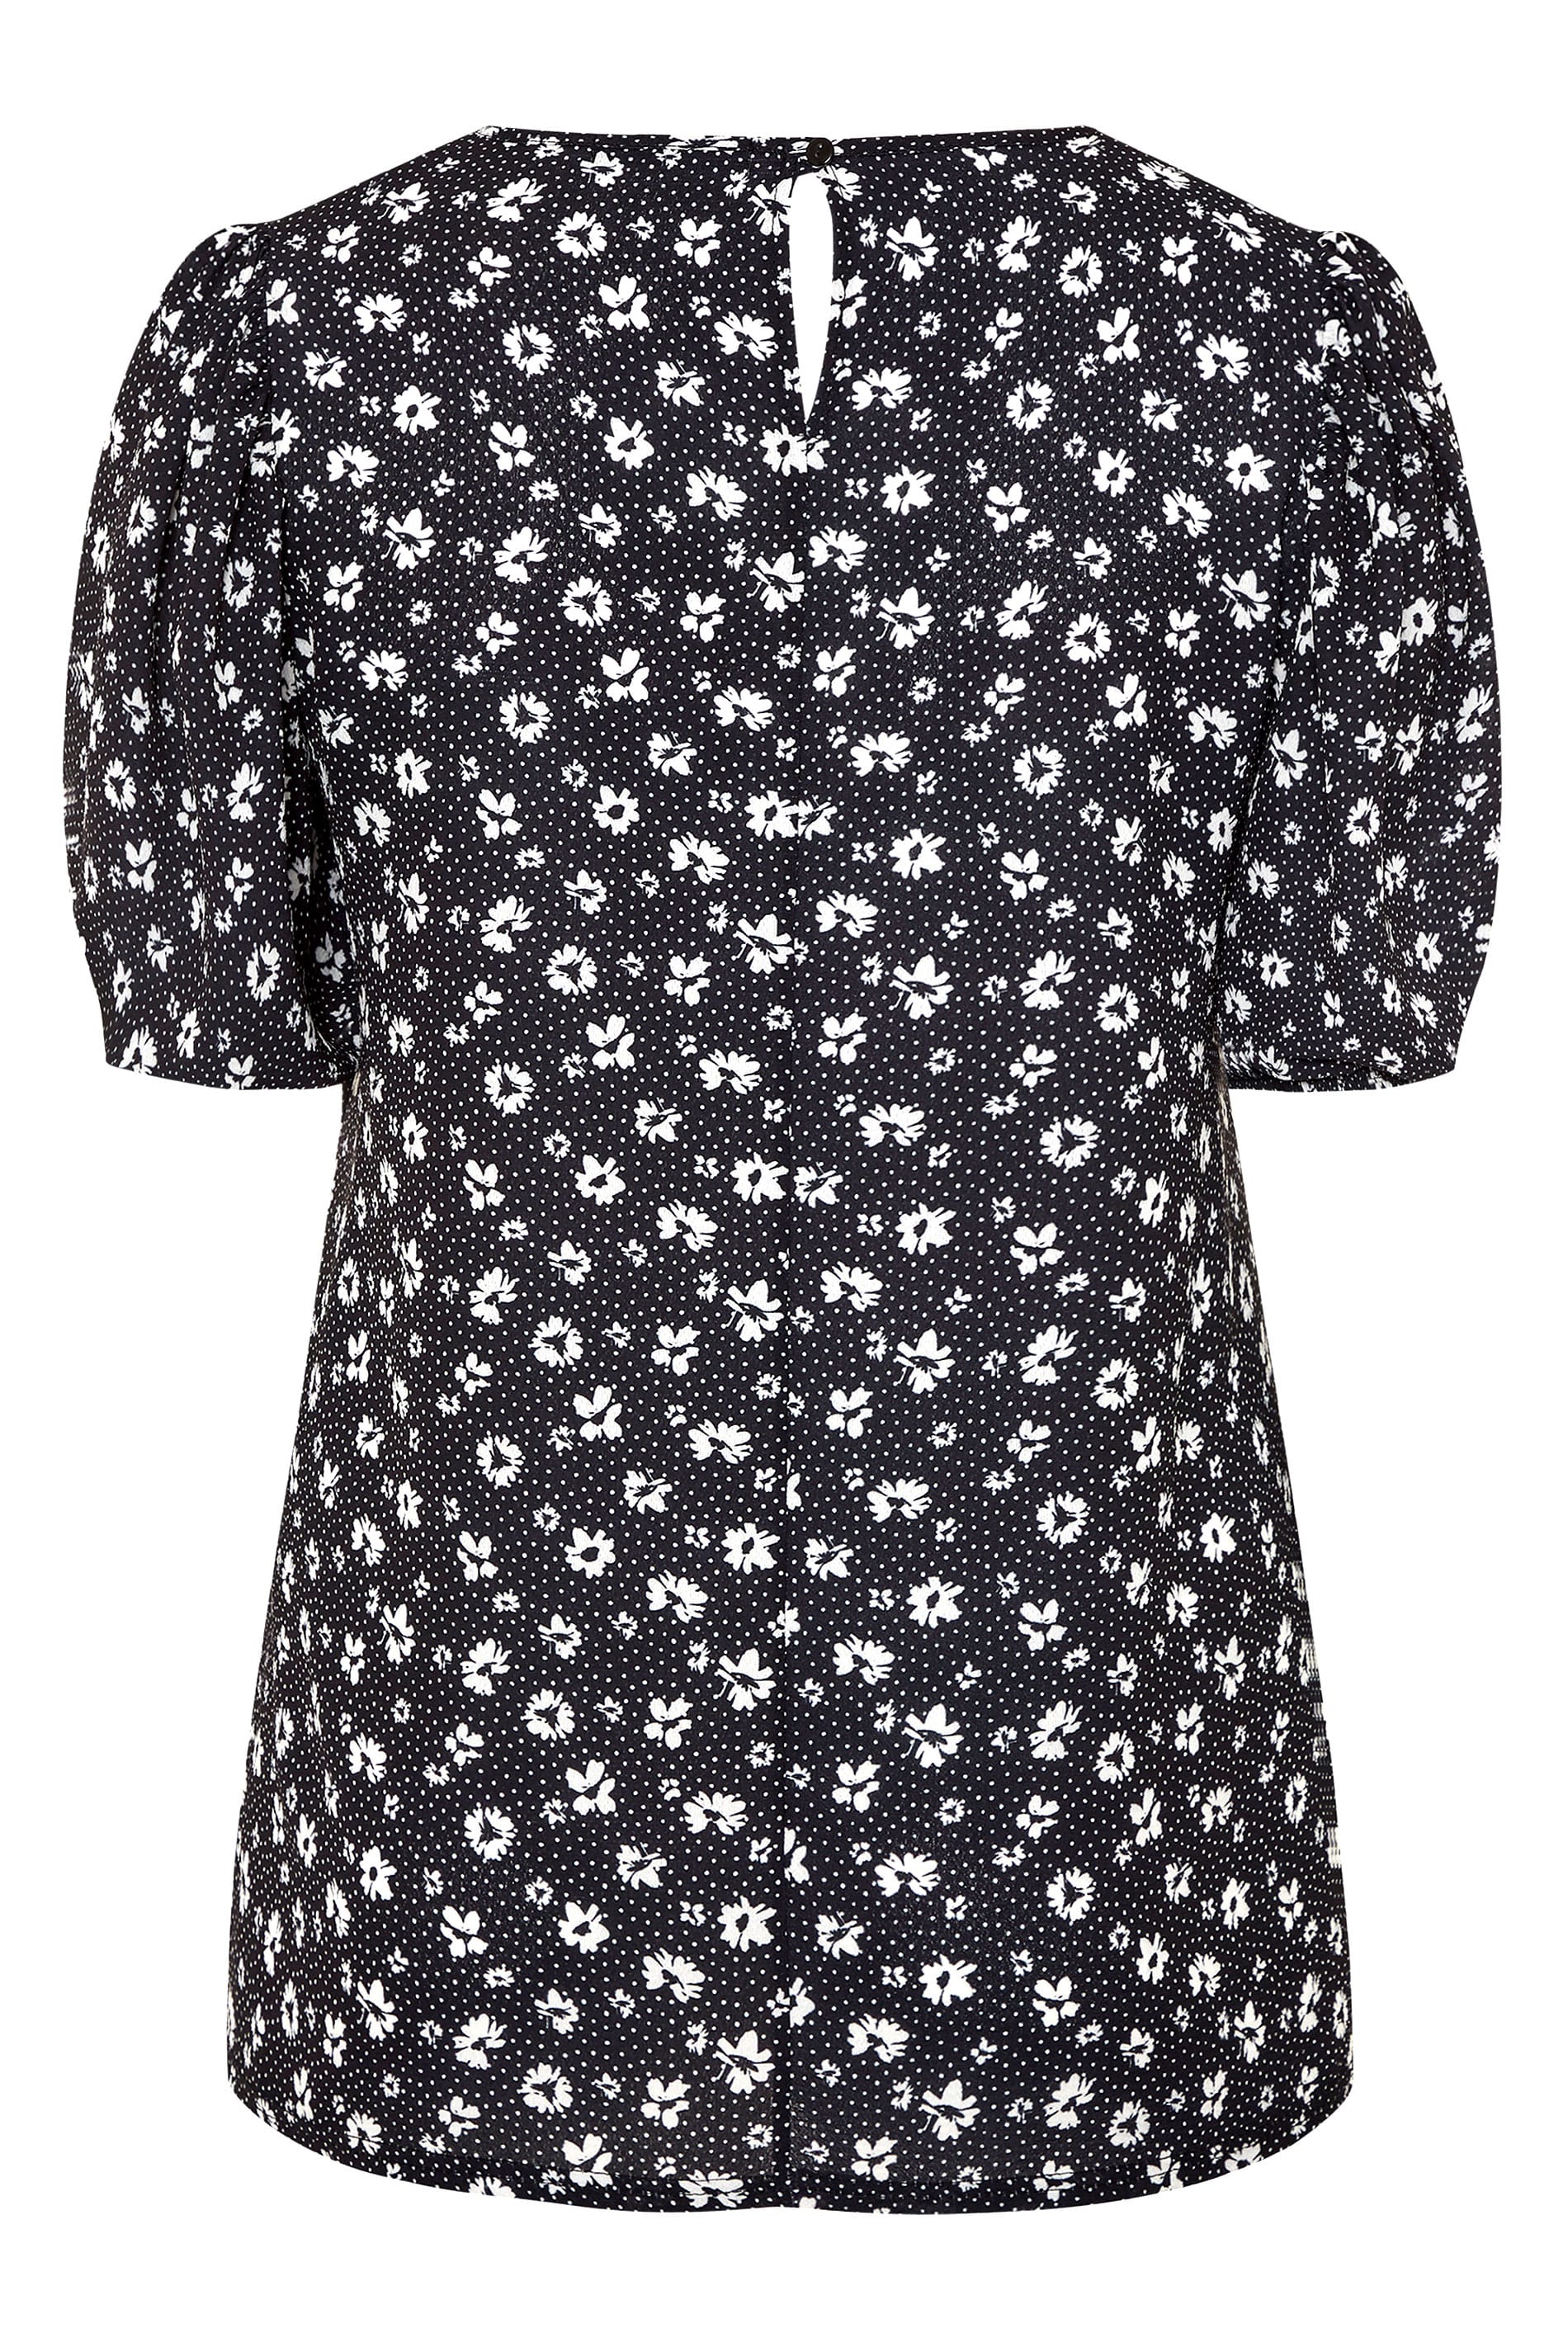 Black Floral Print Puff Sleeve Top | Yours Clothing